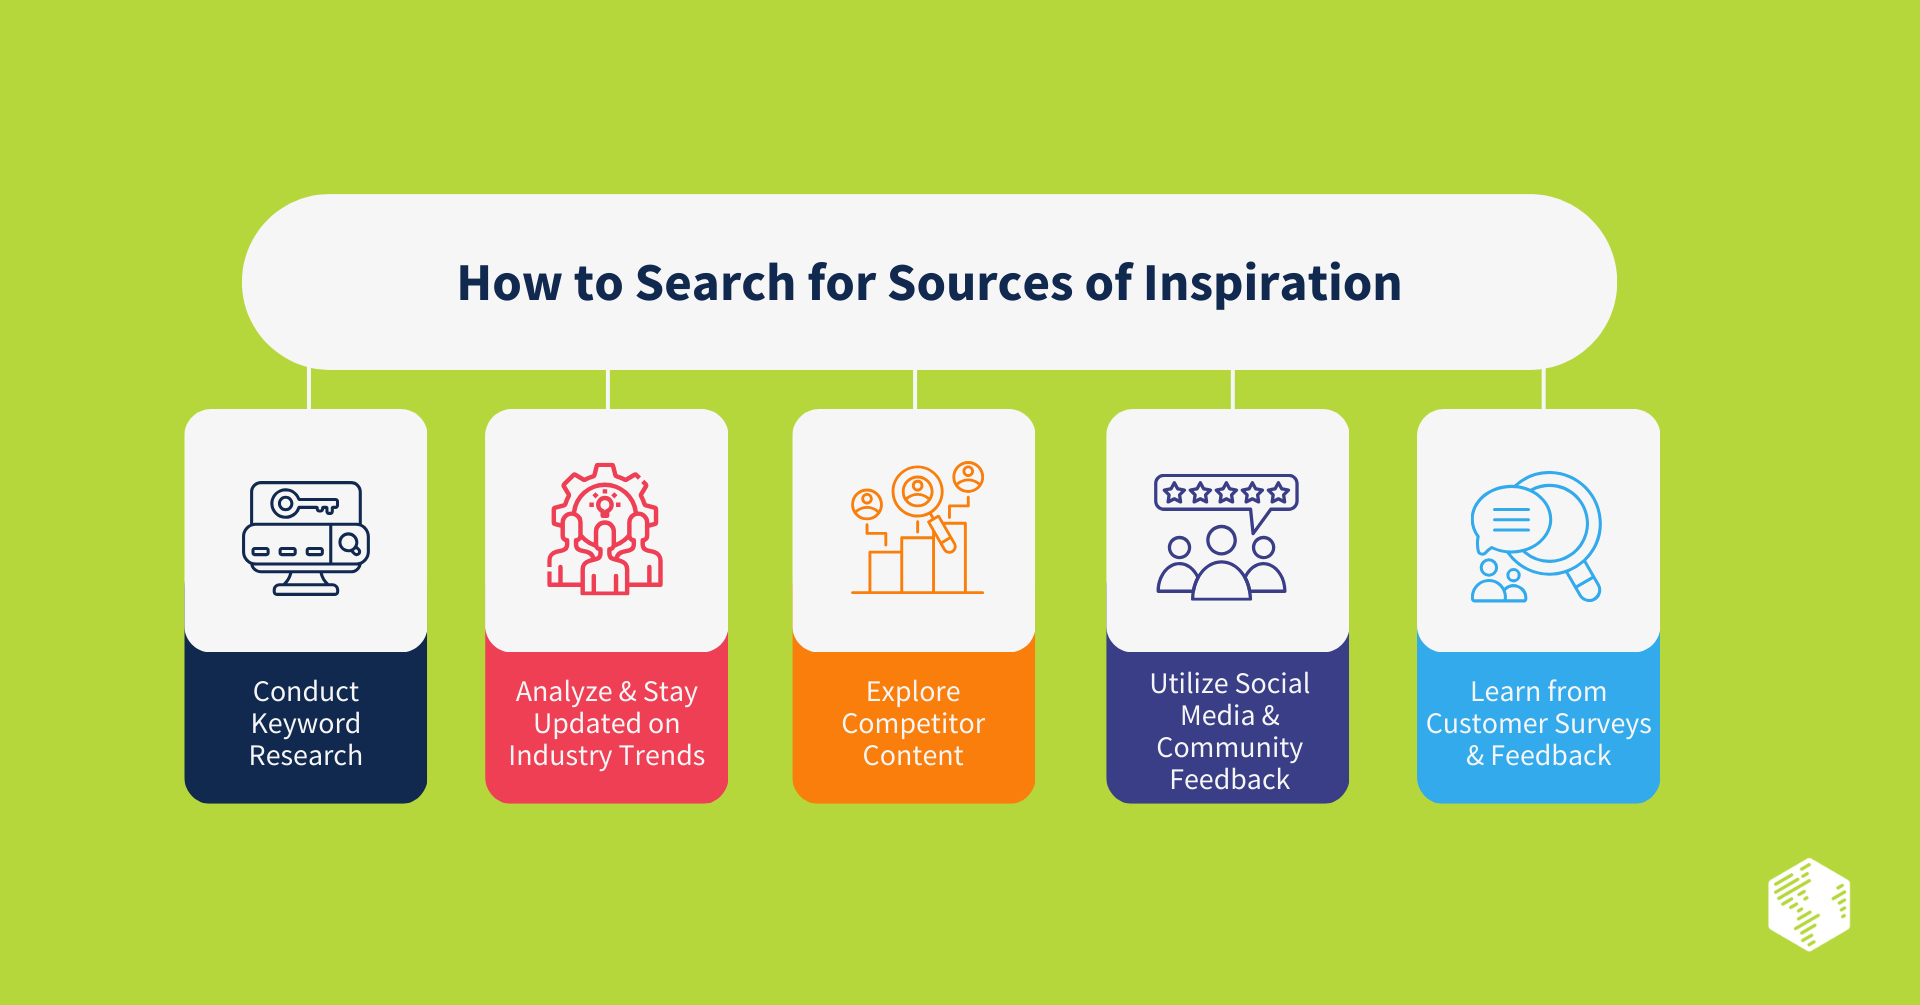  Search for Sources of Inspiration for Content Topiics